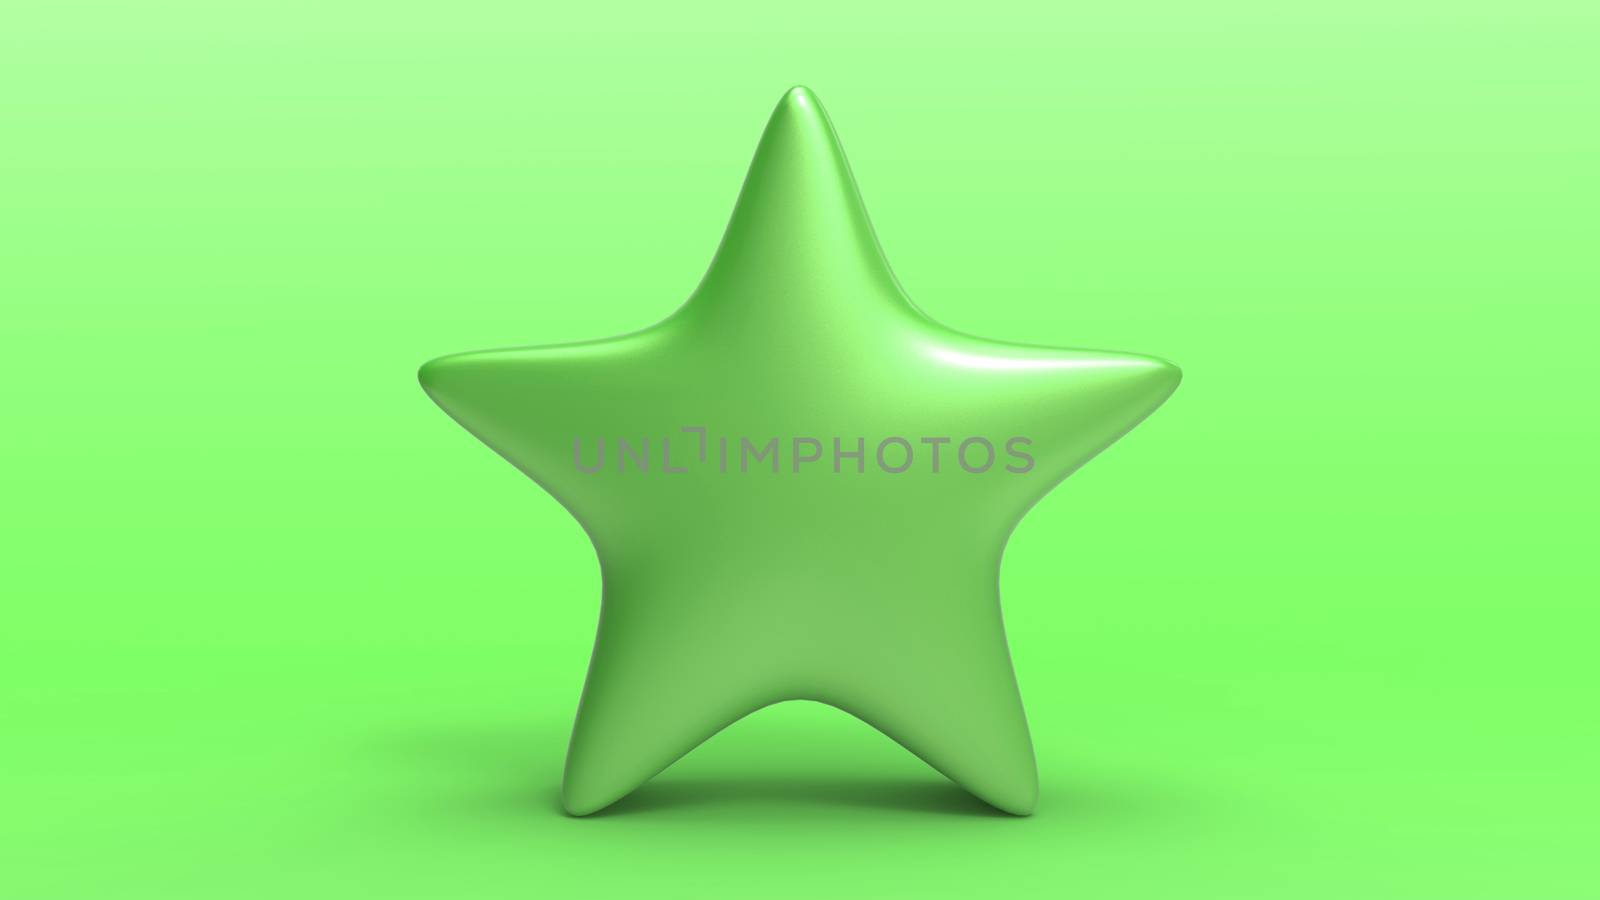 3d green star on color background. Render and illustration of golden star for premium reviews by Andreajk3